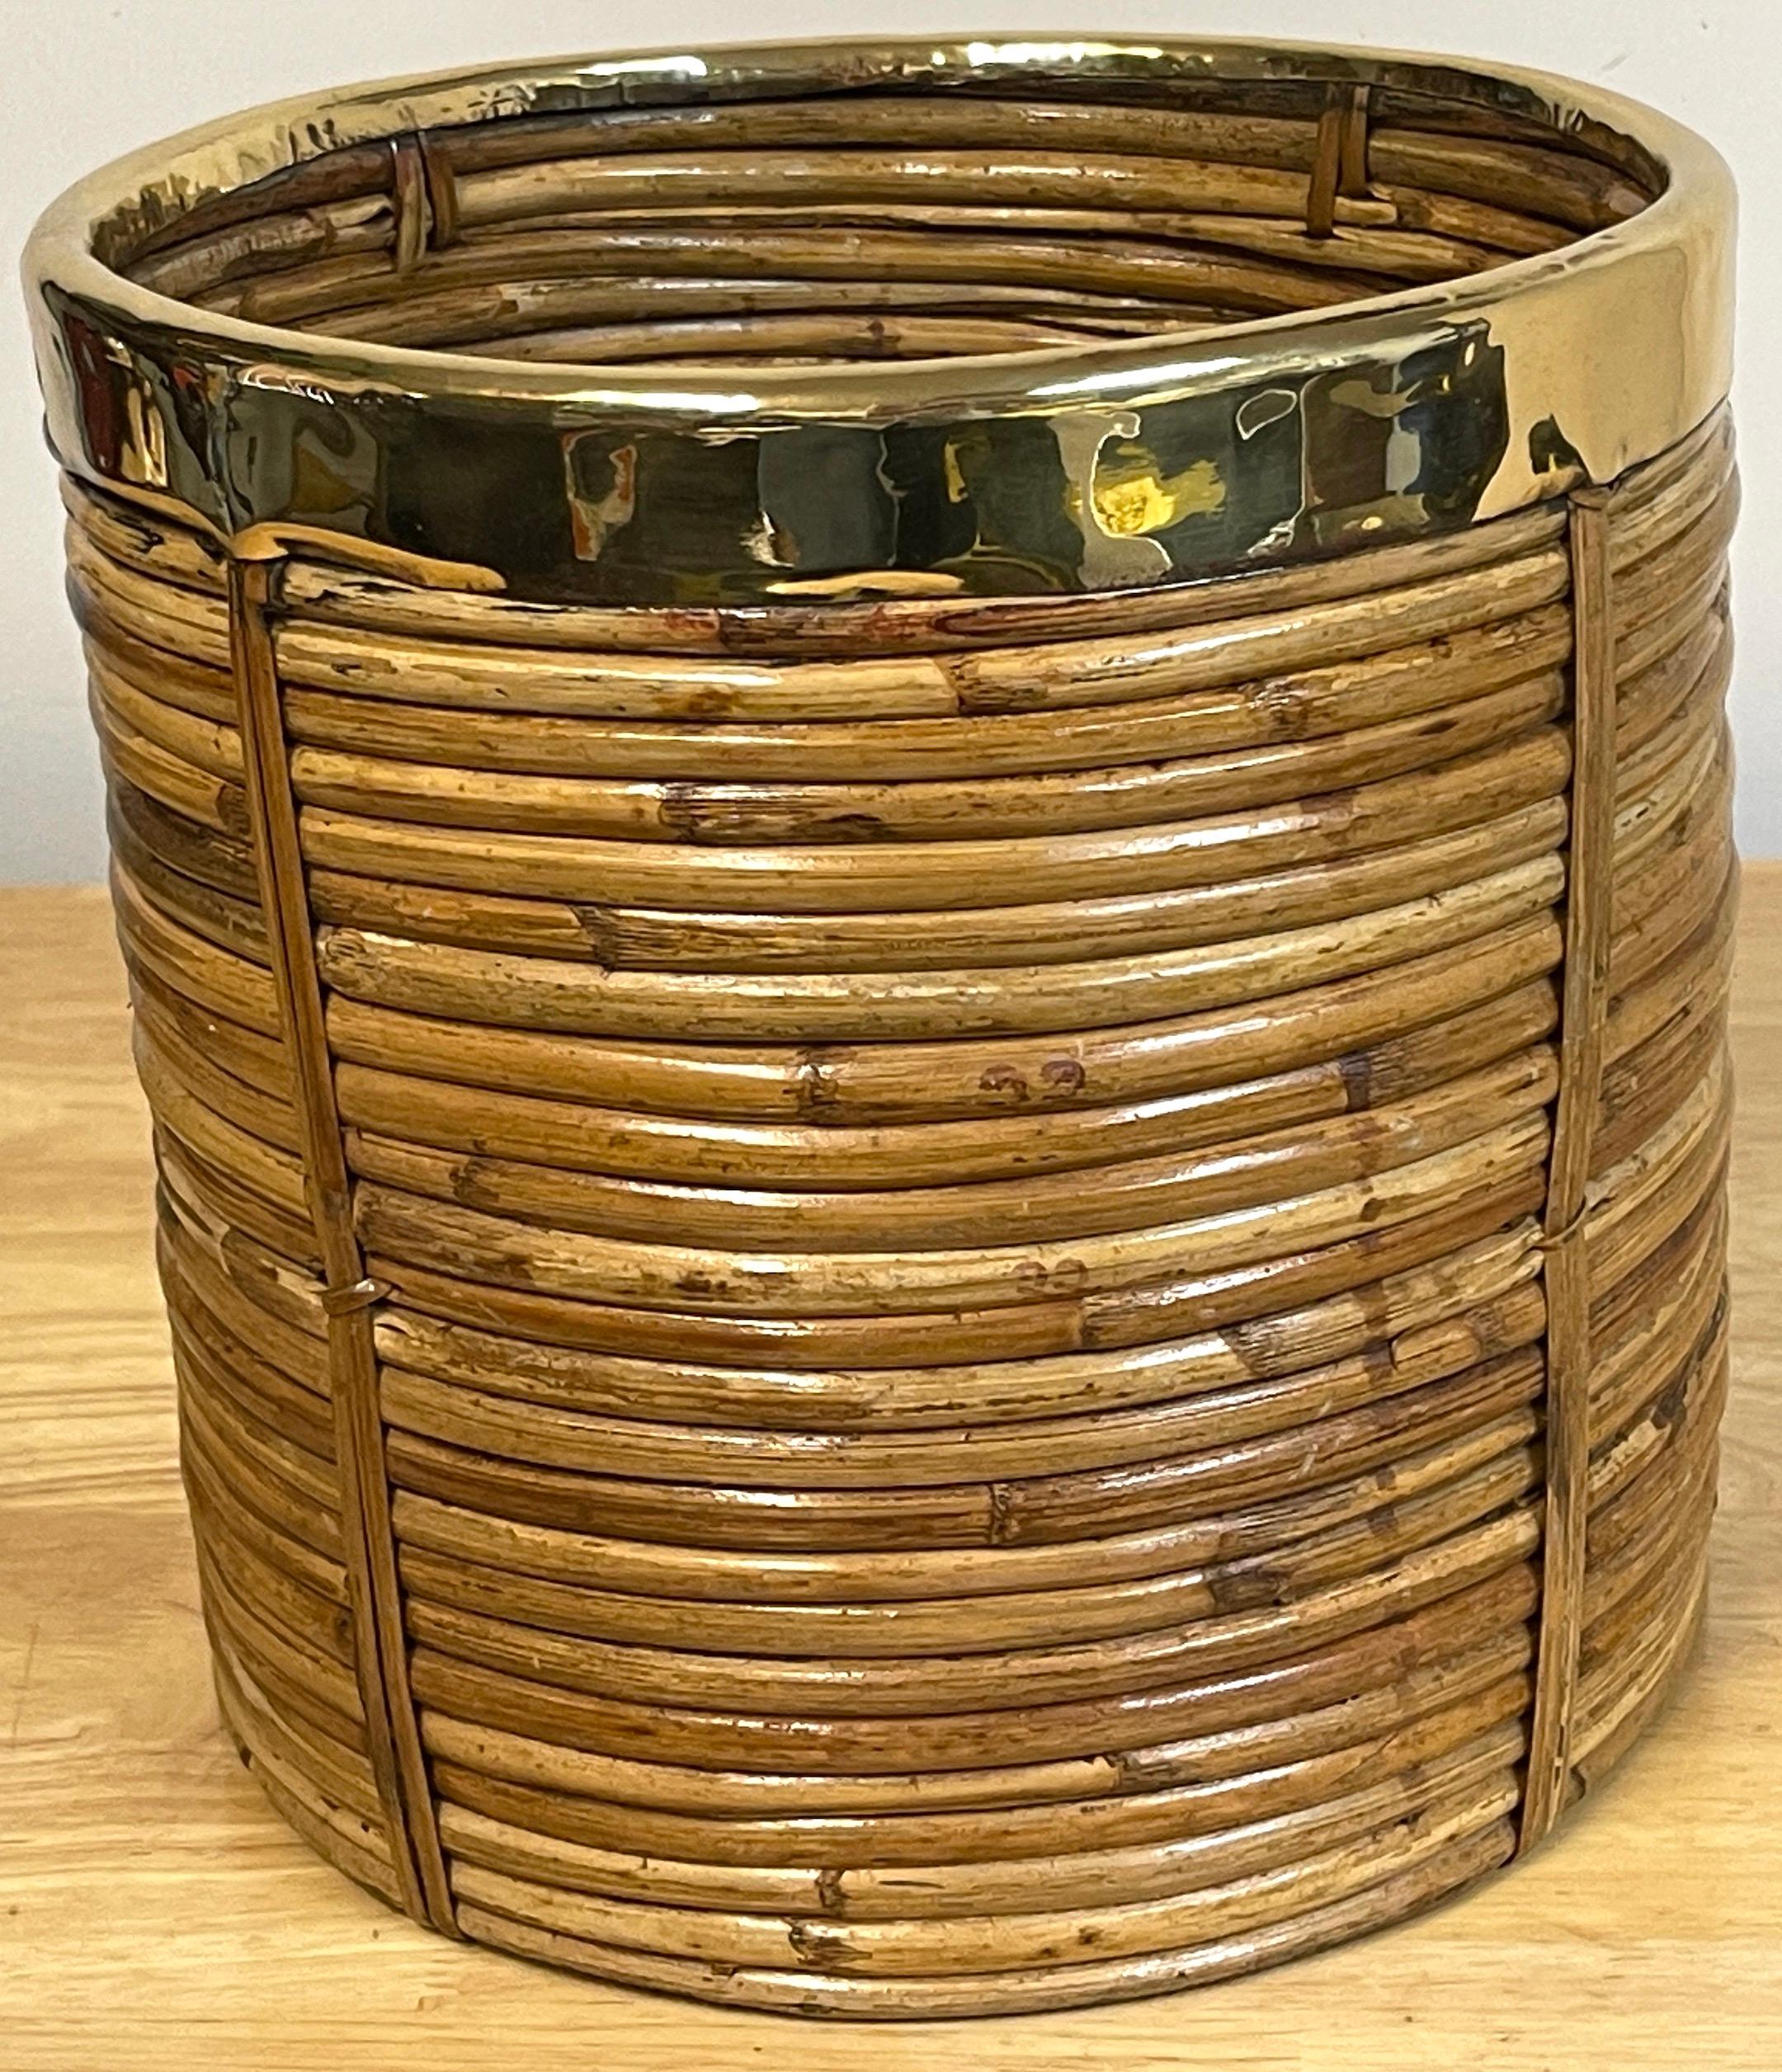 20th Century 1970s Italian Bamboo/ Rattan Wastepaper Basket with Polished Brass Rim